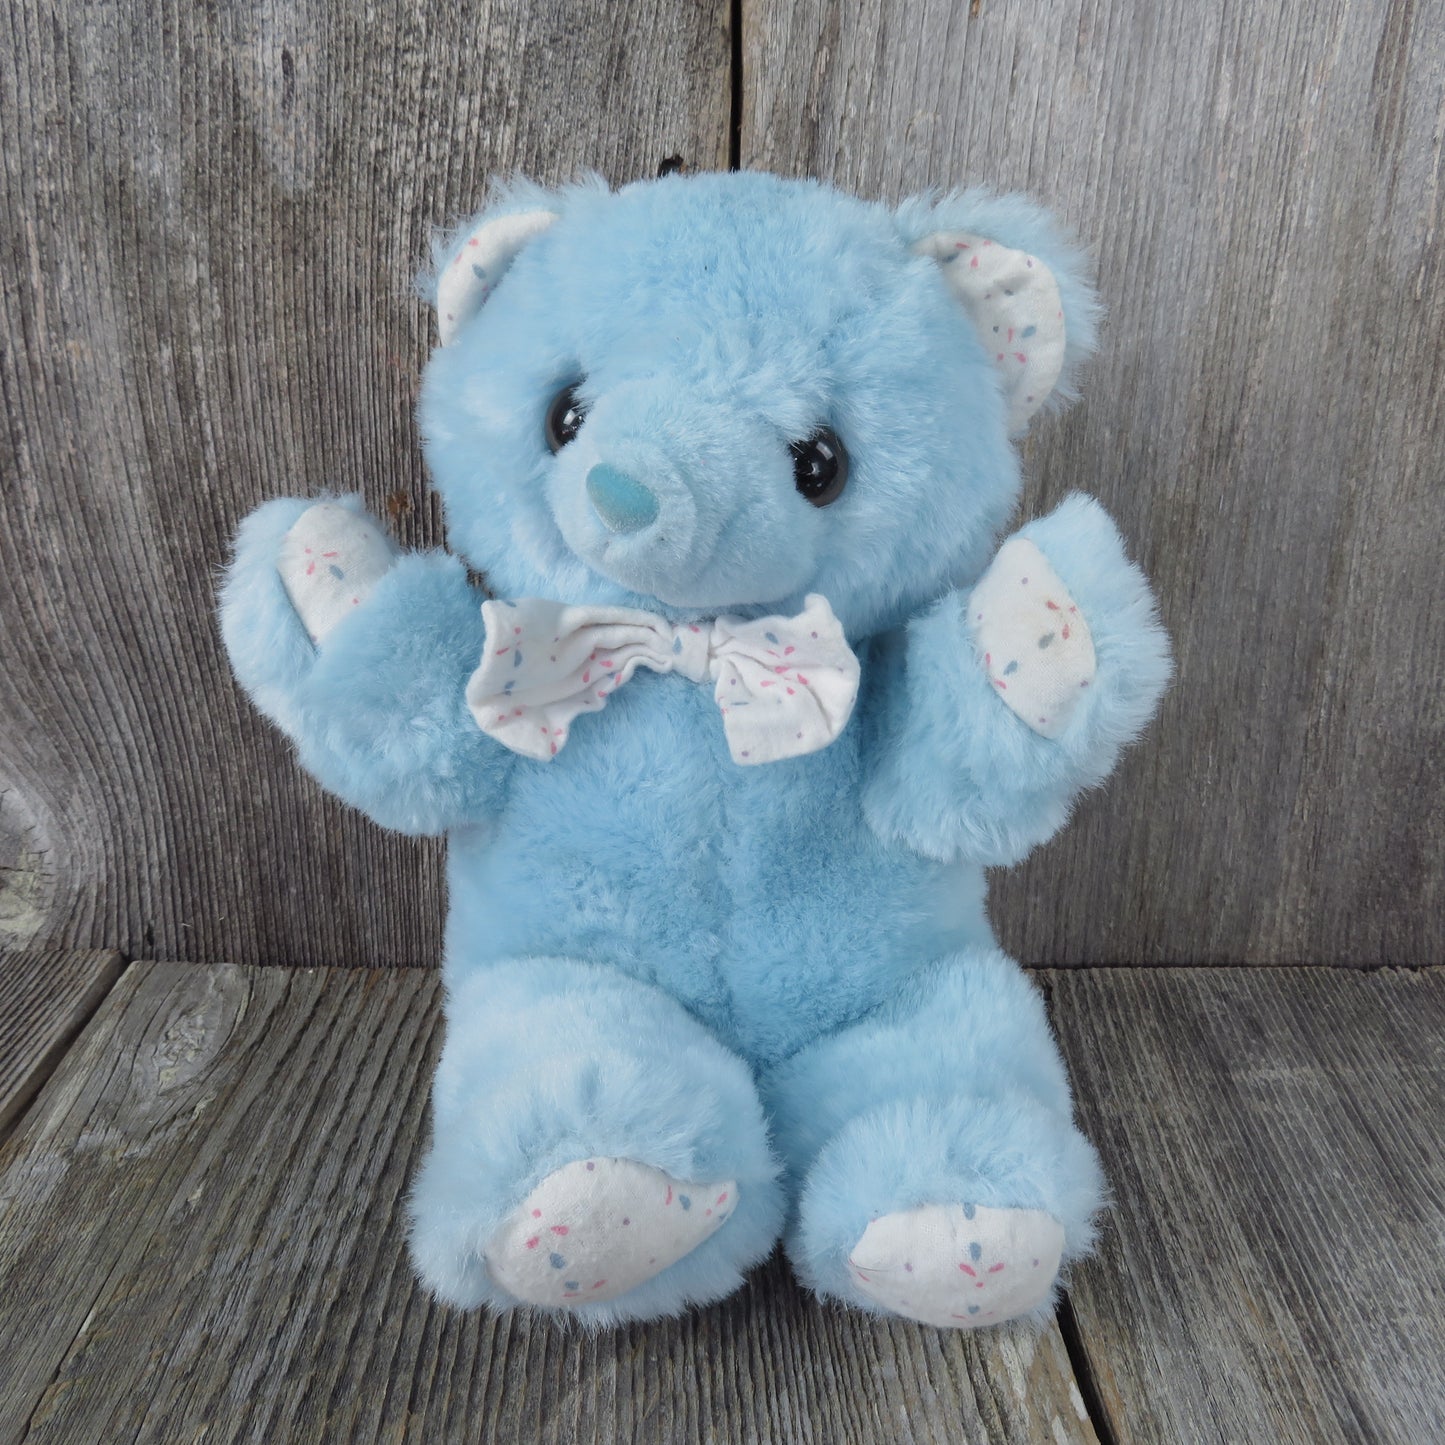 Vintage Blue Teddy Bear Plush Stuffed Animal Flocked Nose White Flannel Bow Tie and Paws Cuddle Wit - At Grandma's Table